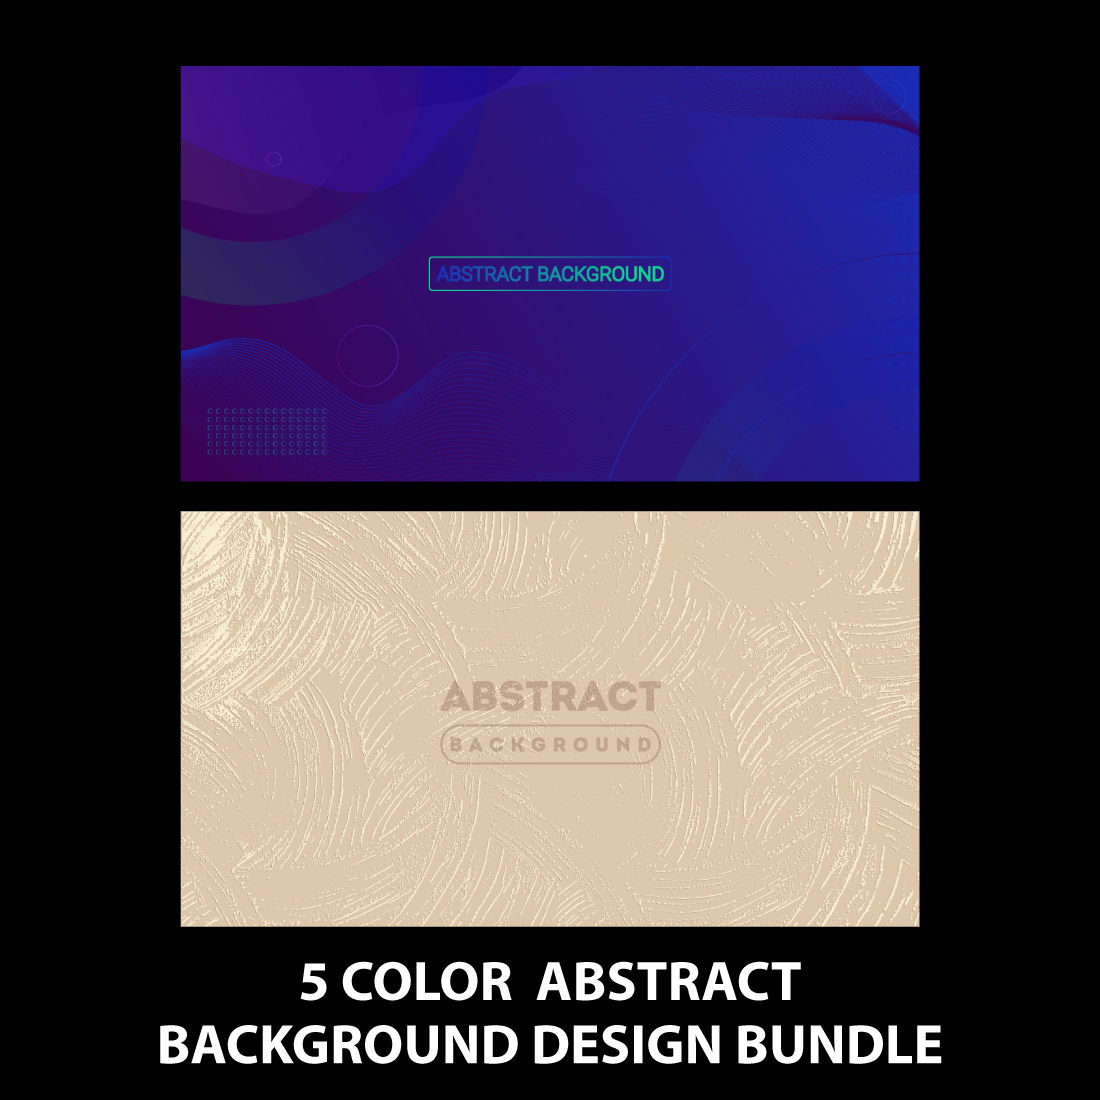 5 Color Abstract Background design bundle preview image.